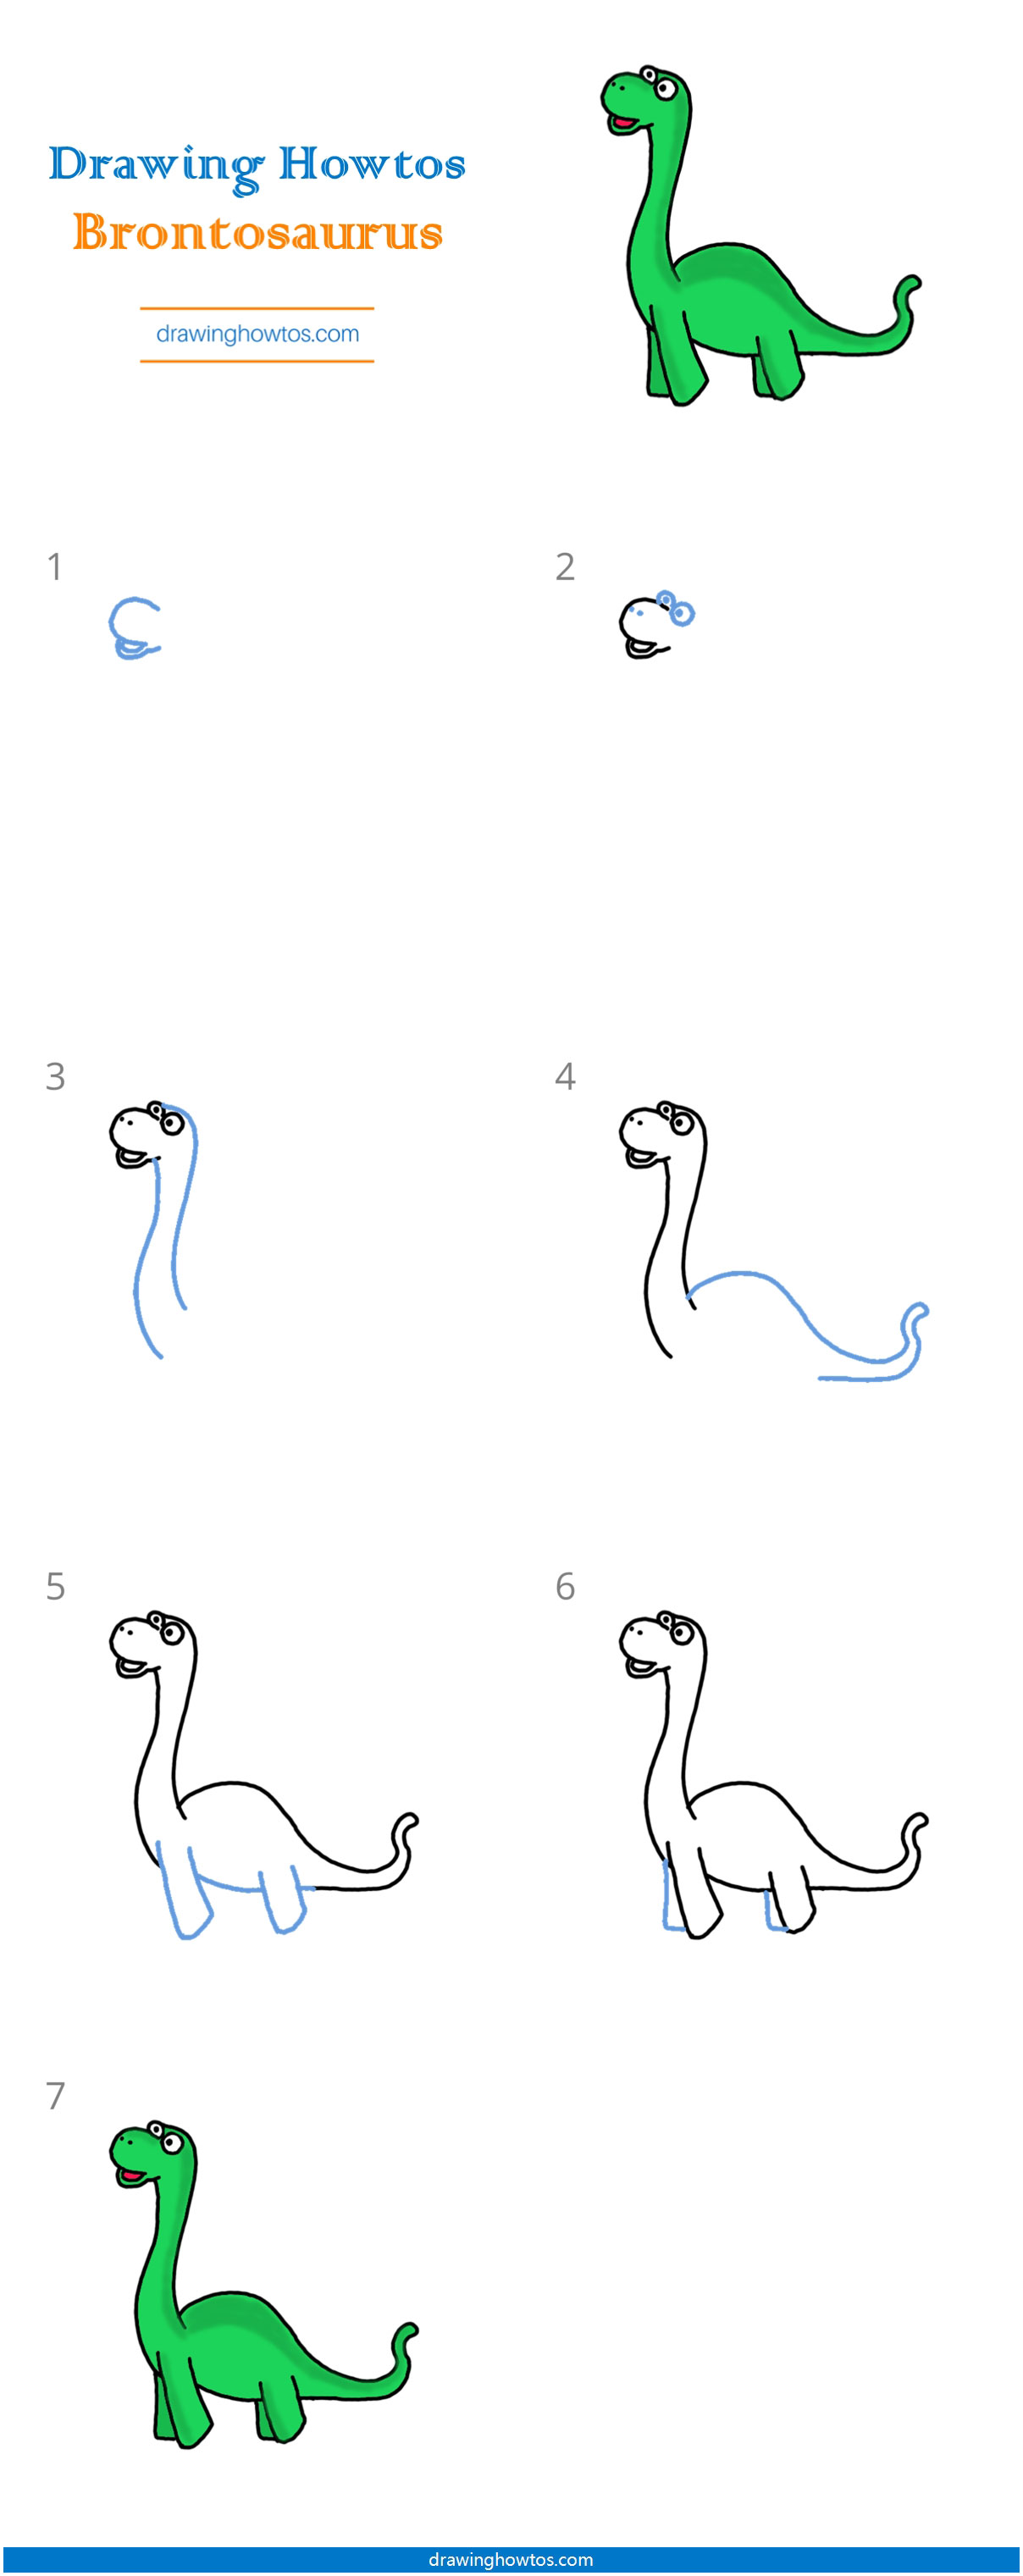 How to Draw a Little Brontosaurus Step by Step